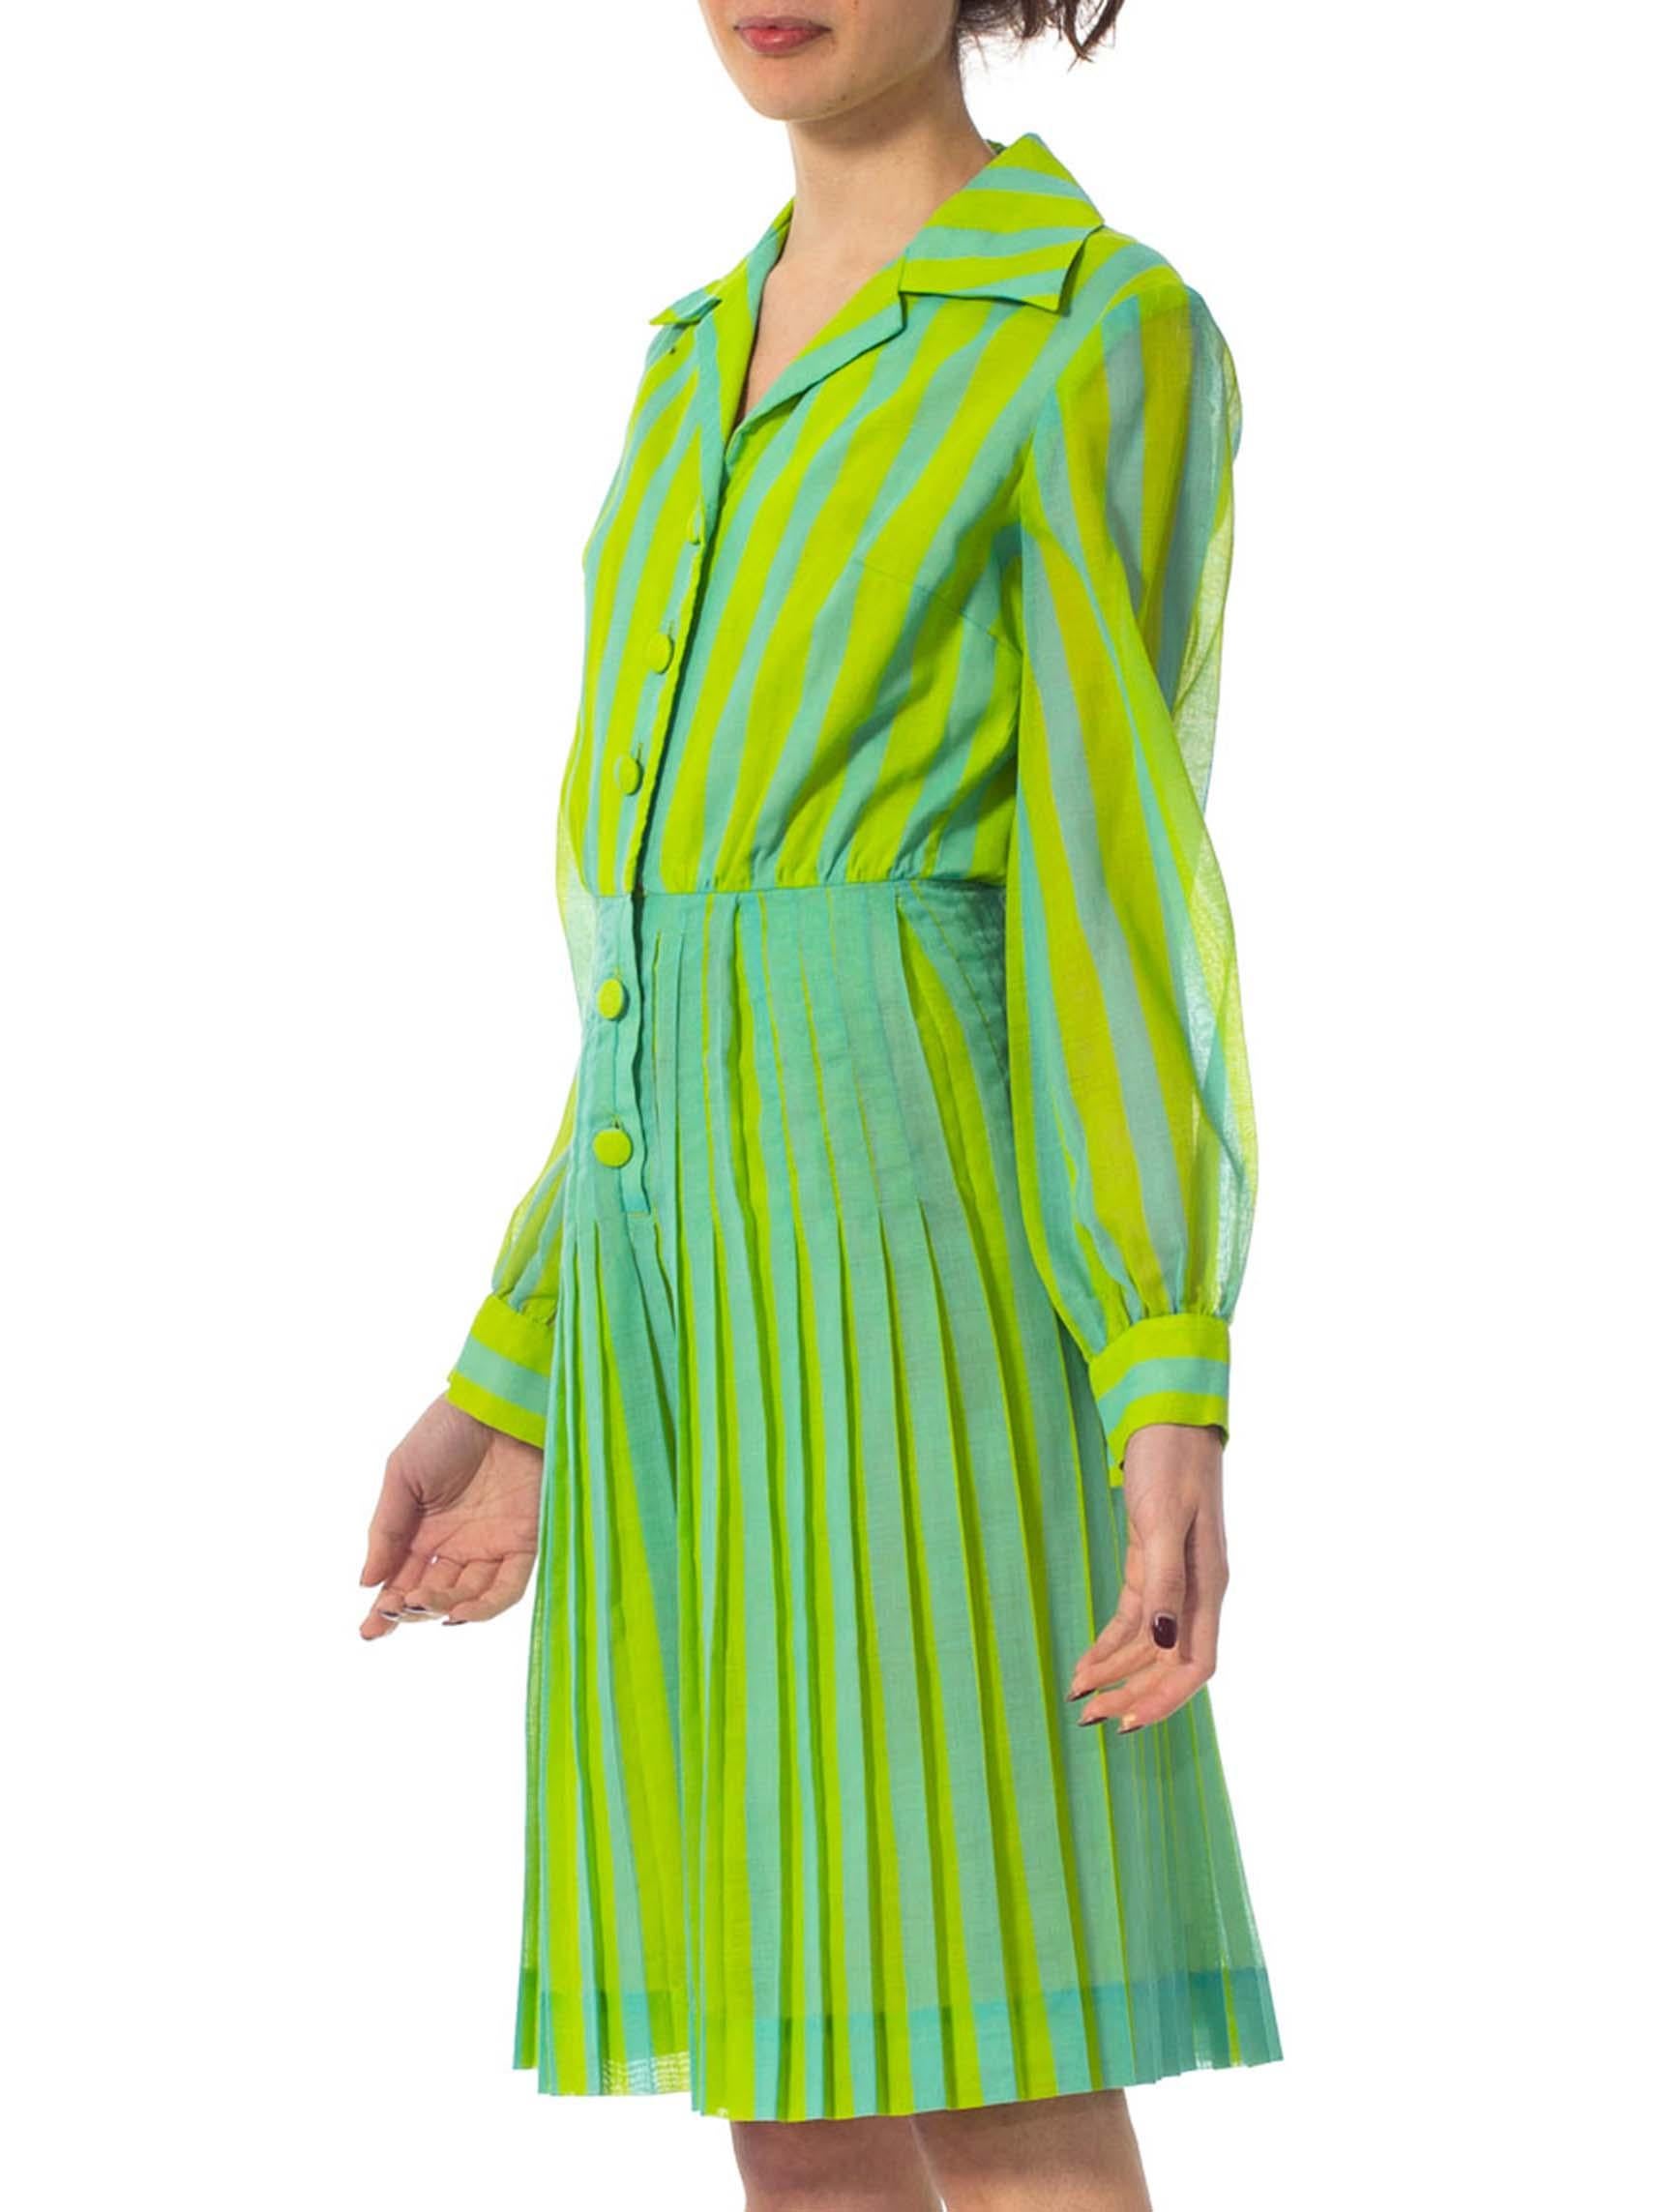 1970S DADDY DRADDY's Lime Green & Blue Cotton Striped Pleated Mod Dress For Sale 3